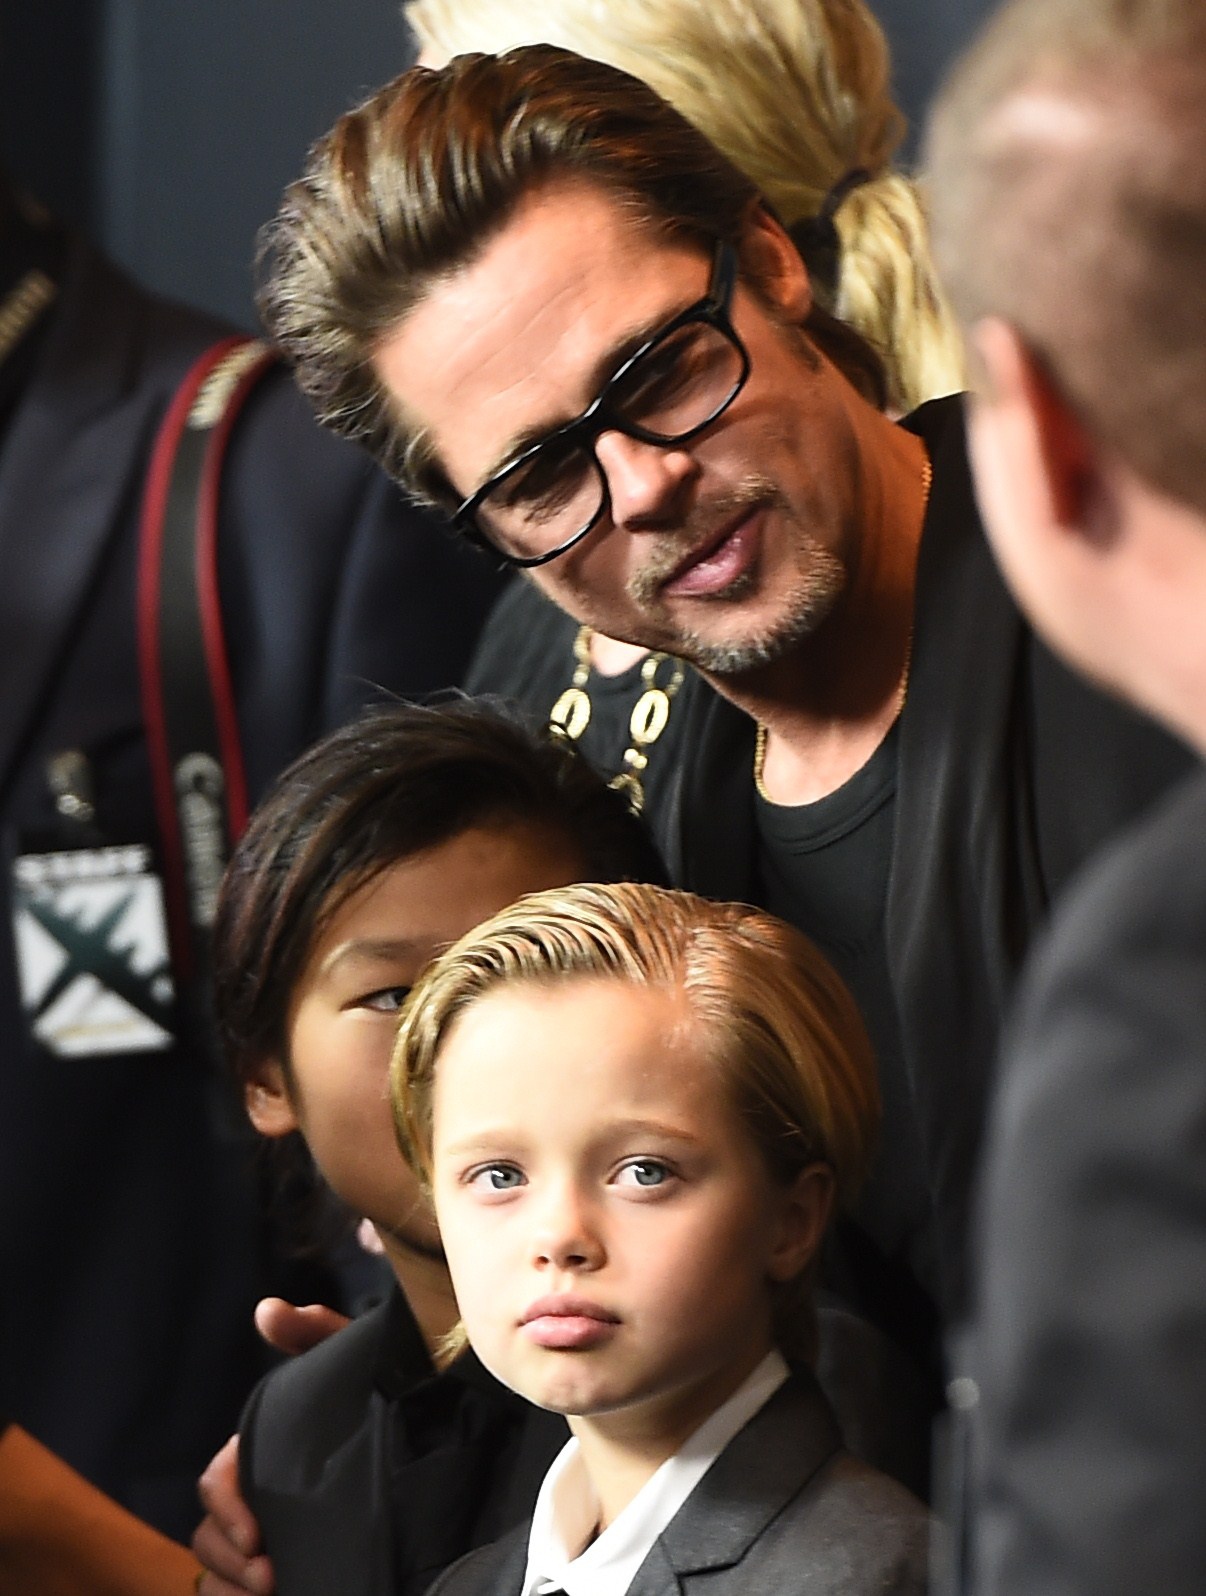 Brad Pitt and his children Pax and Shiloh in California in 2014. | Source: Getty Images